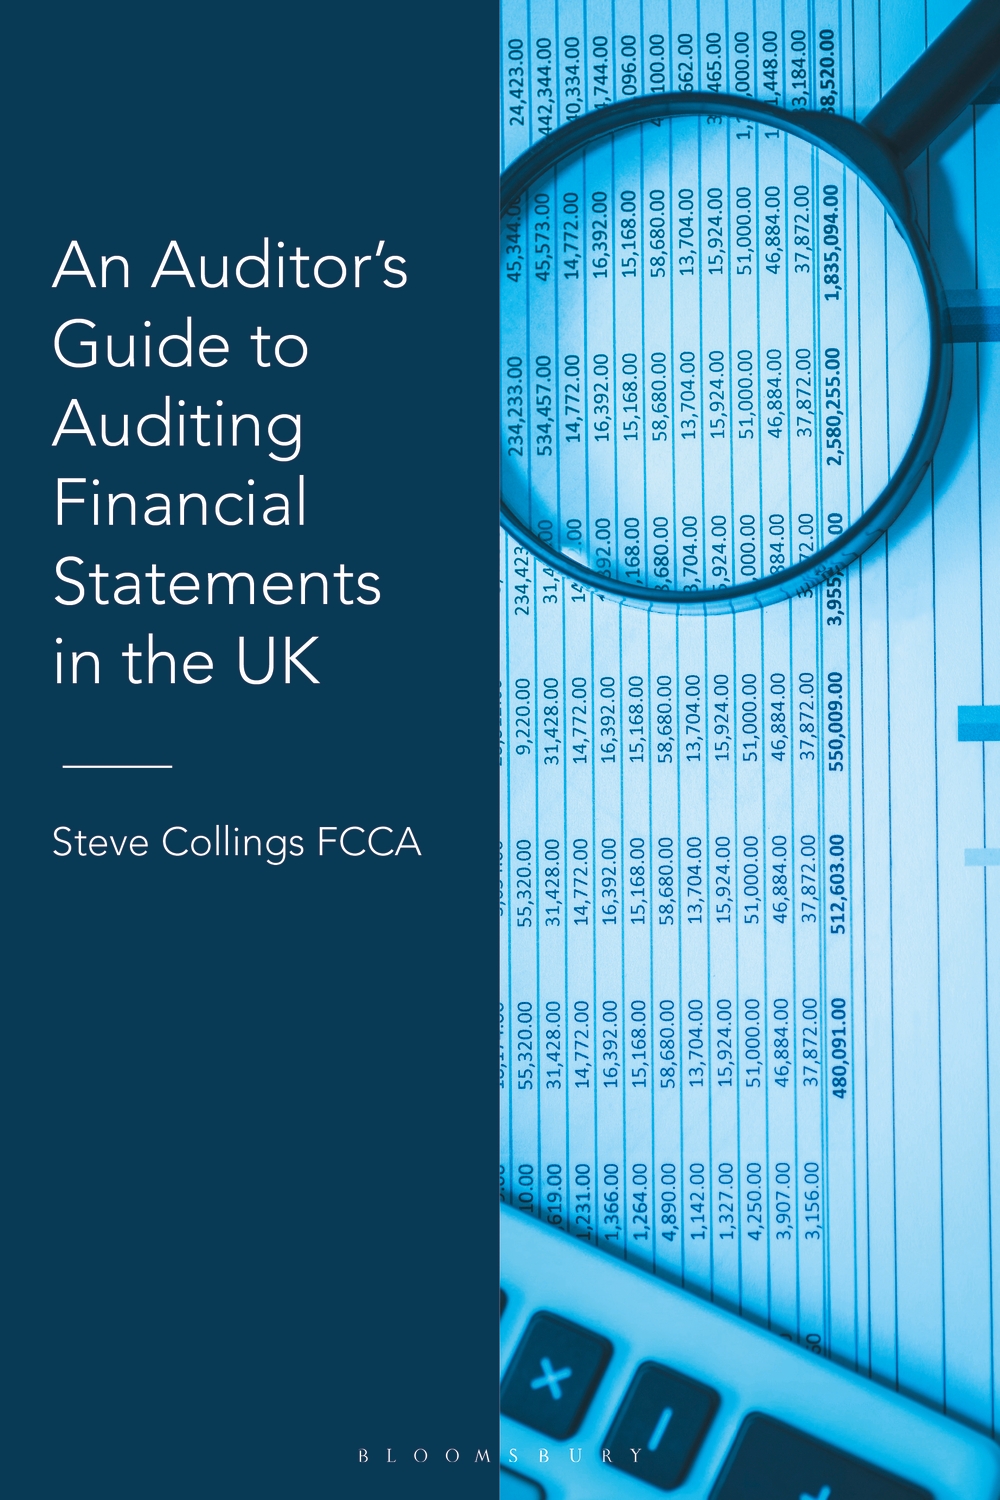 Auditor’s Guide to Auditing Financial Statements in the UK book jacket